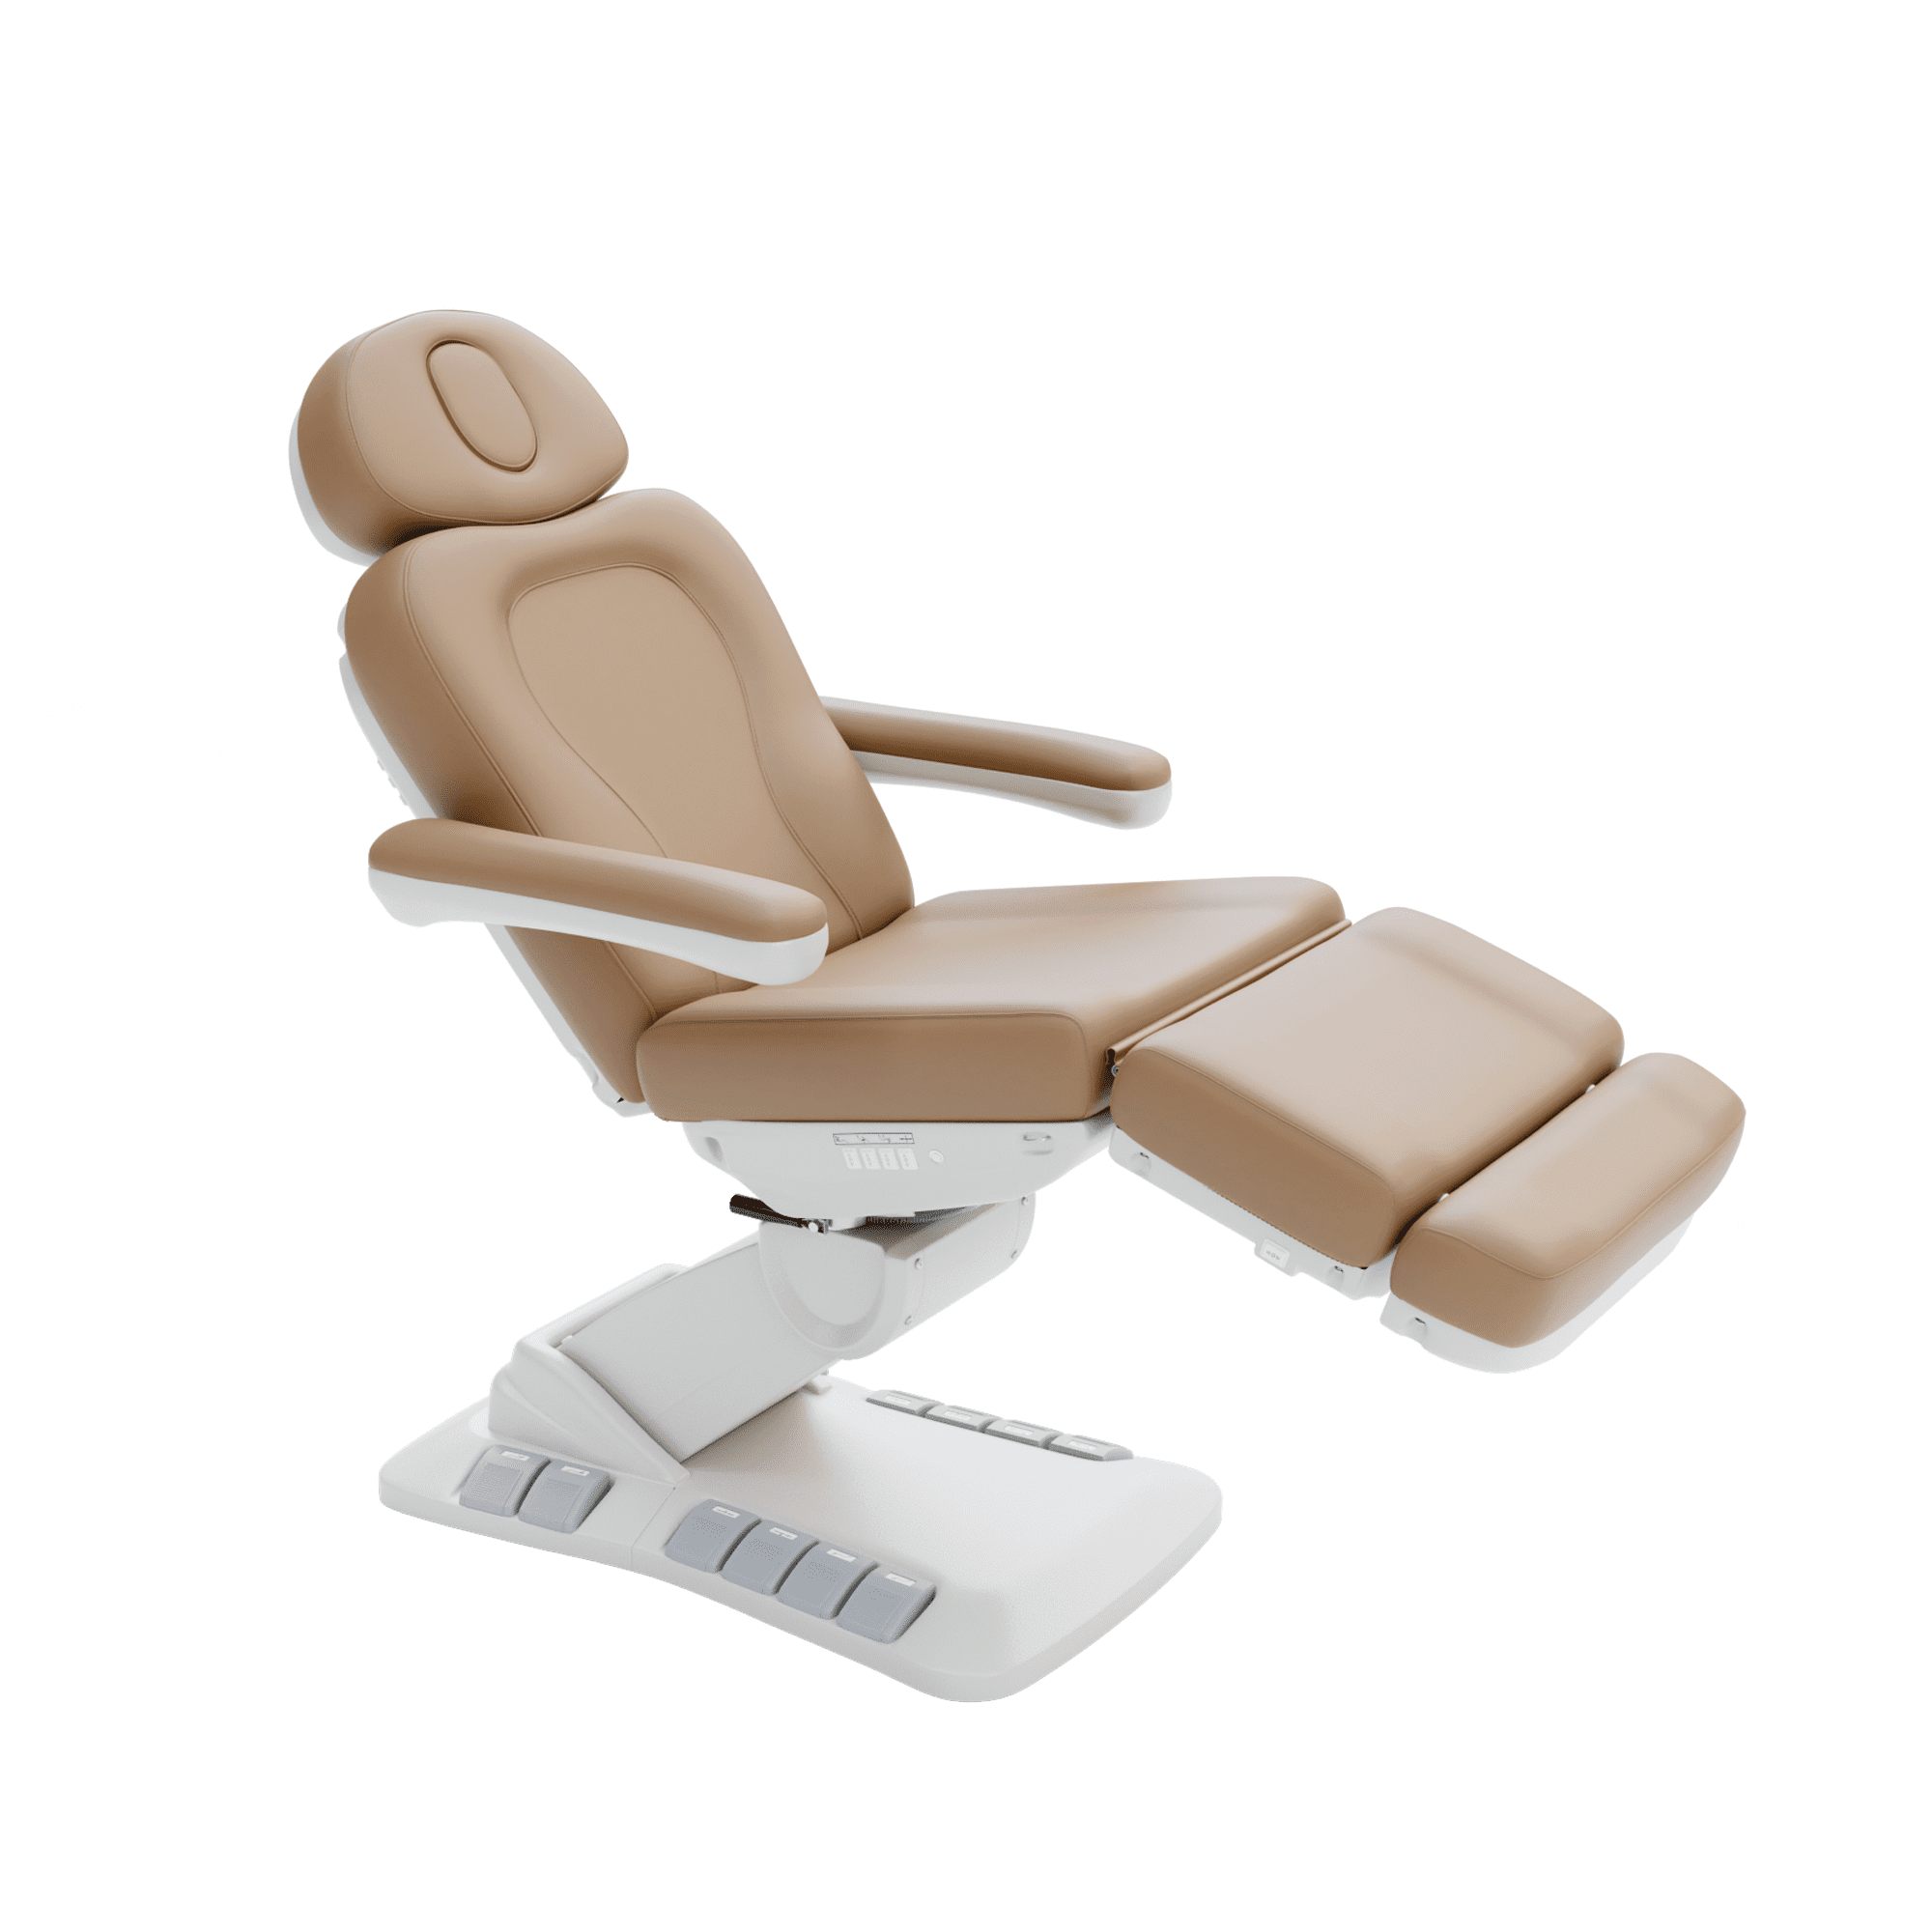 Comfort in adjustable treatment chairs with electric actuators